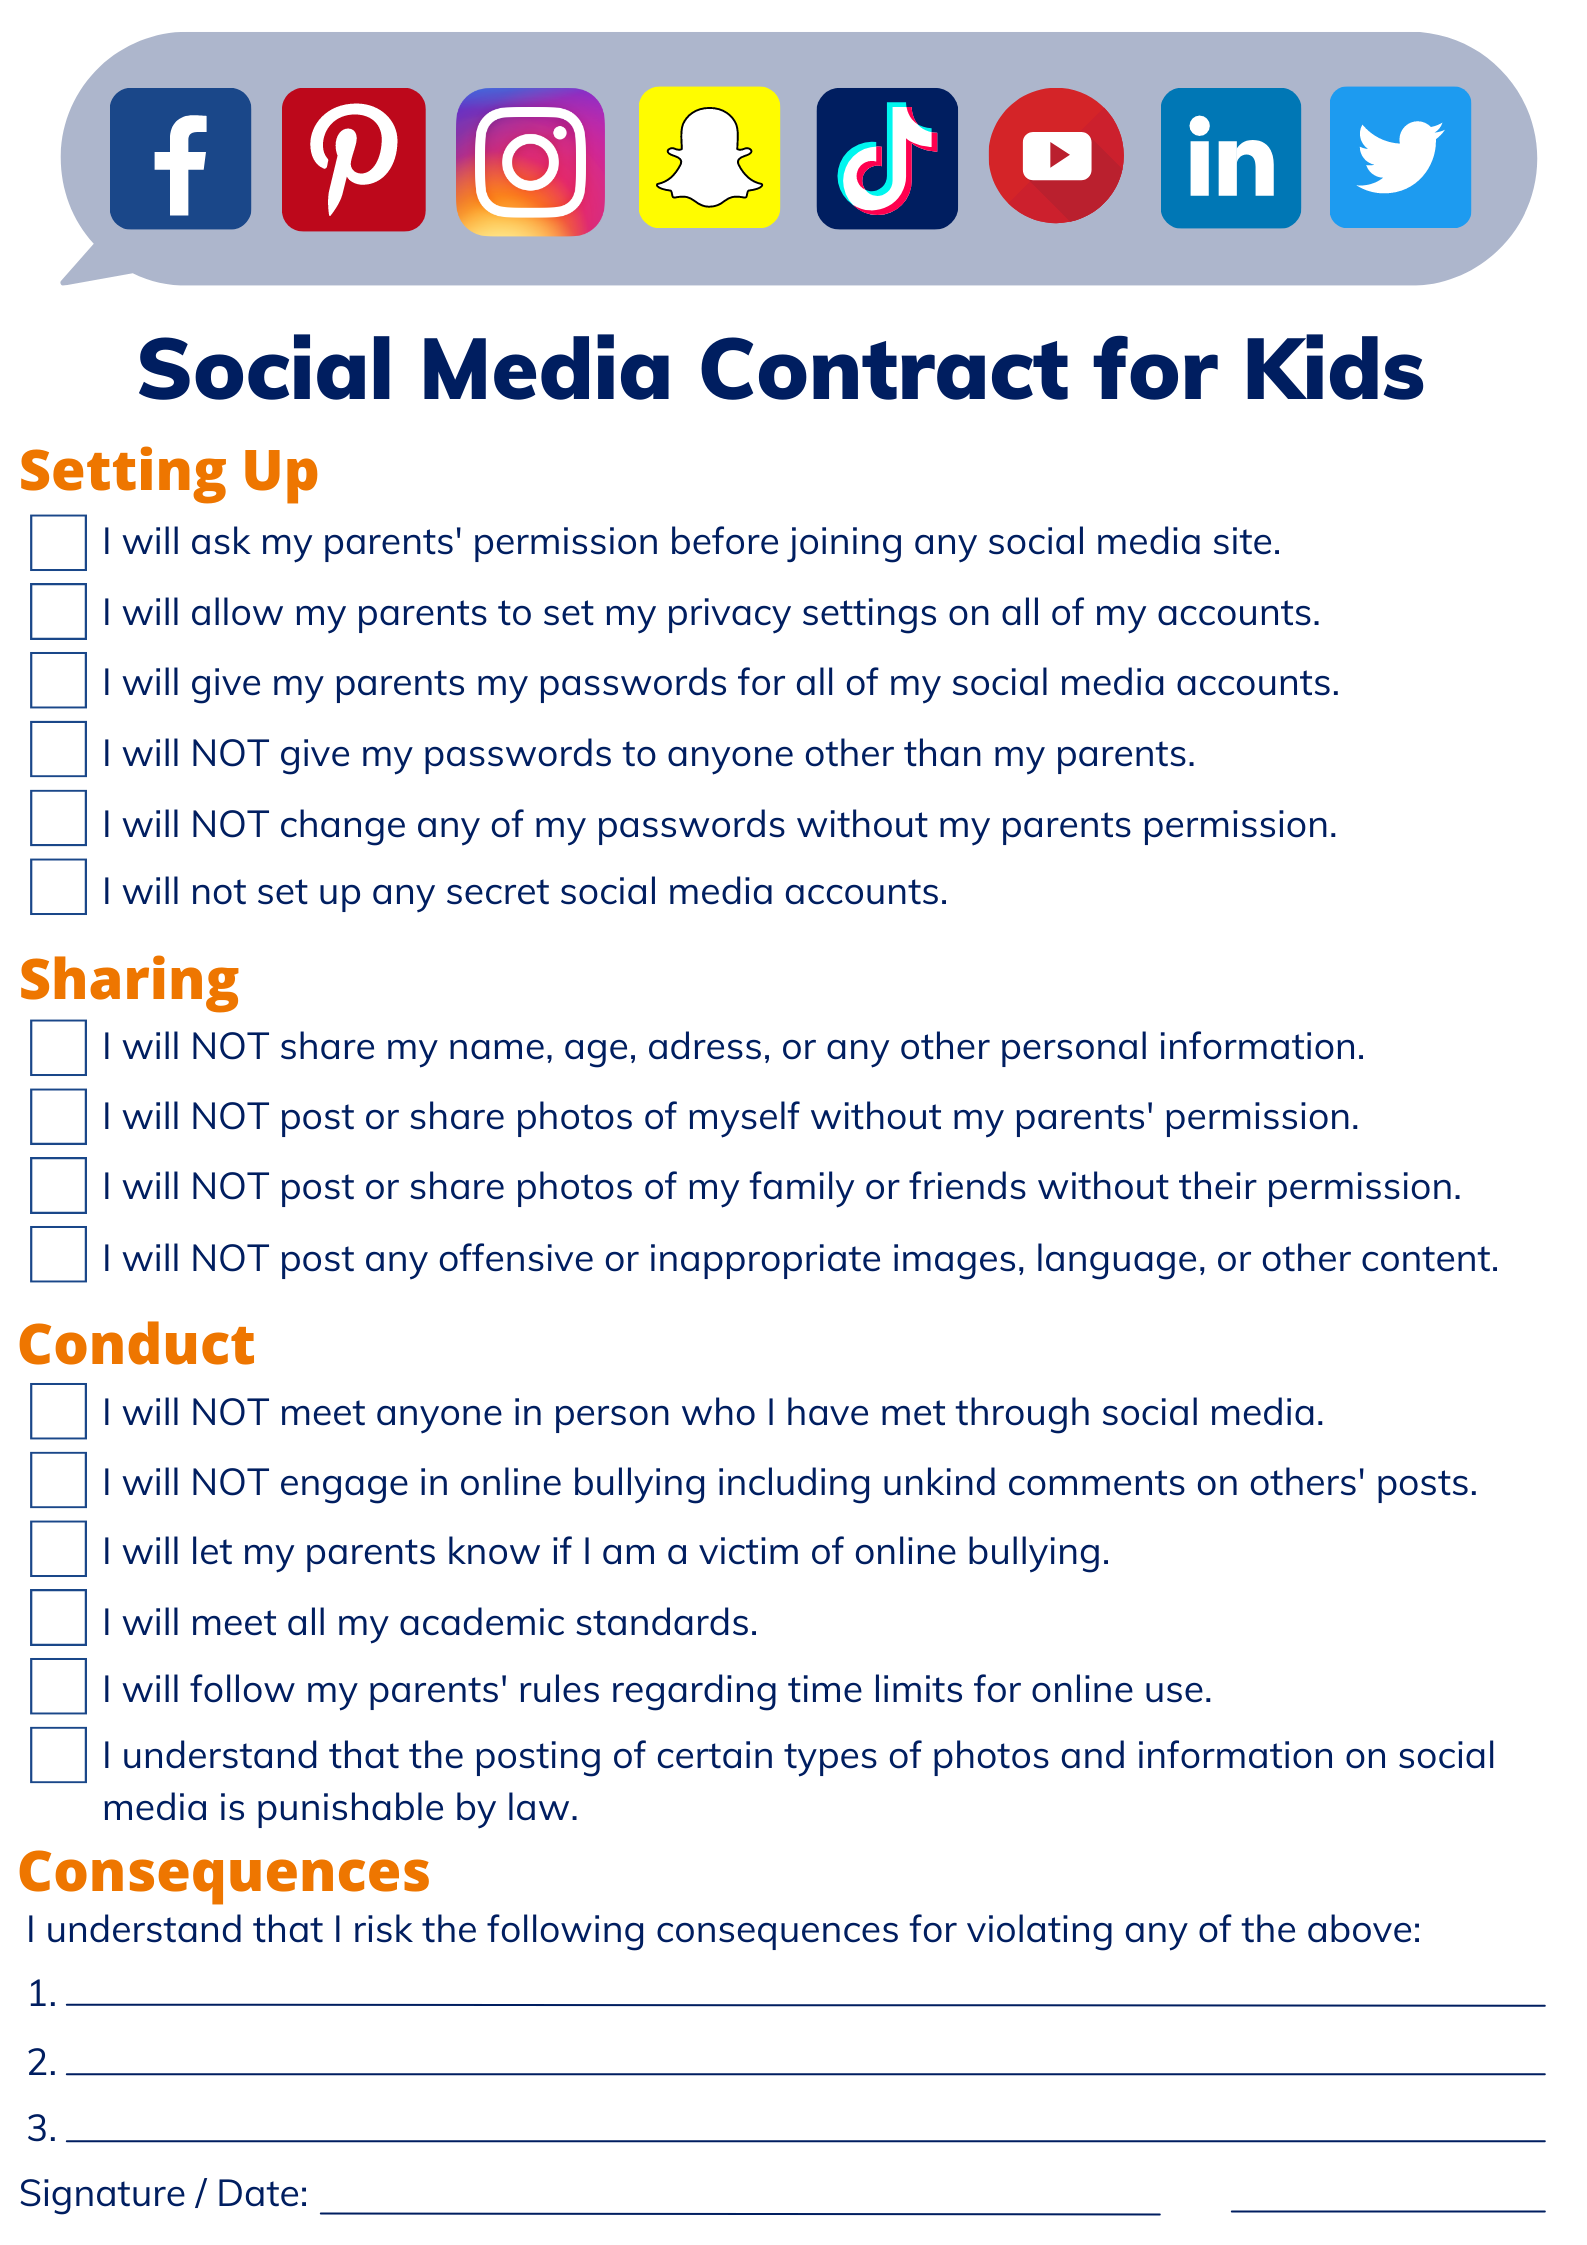 Social Media Contract for Kids